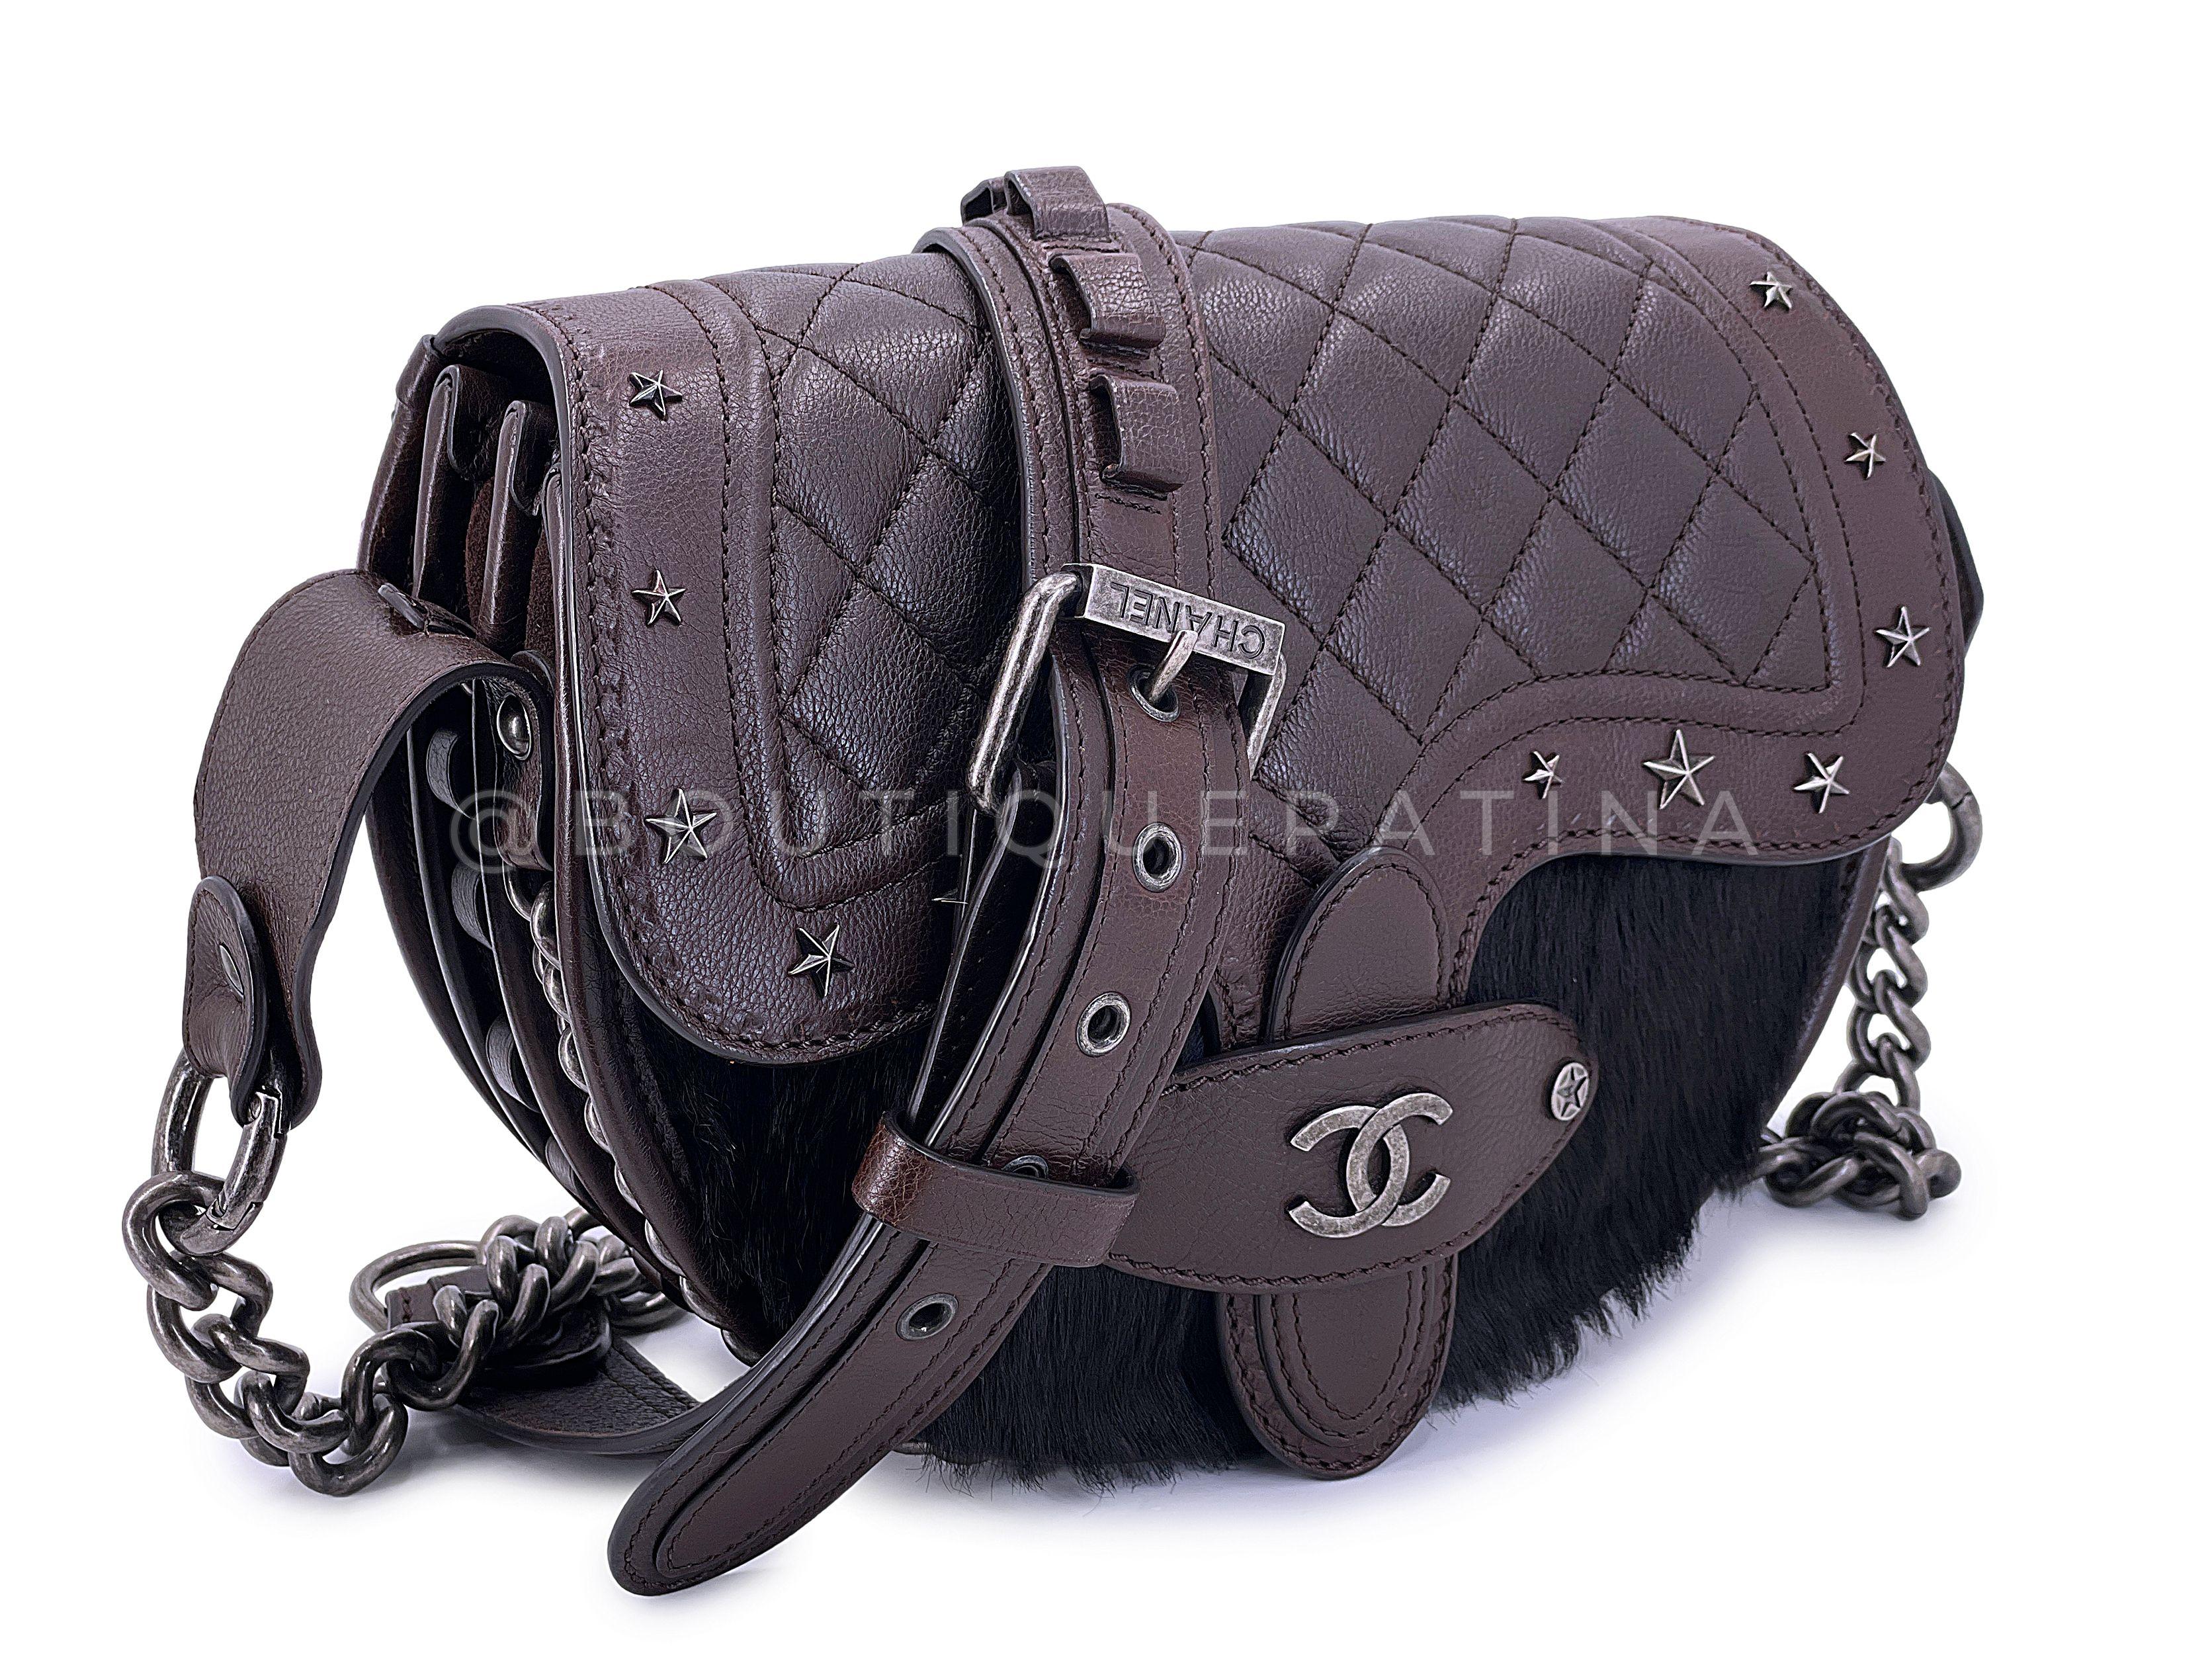 Store item: 67762
Chanel 2014 Paris Dallas Métiers d'Art Brown Pony Hair Crossbody Bullet Strap Bag RHW from Karl Lagerfeld's Paris-Dallas collection is a collectible piece.

Made of brown grained quilted leather and black pony hair on front, the